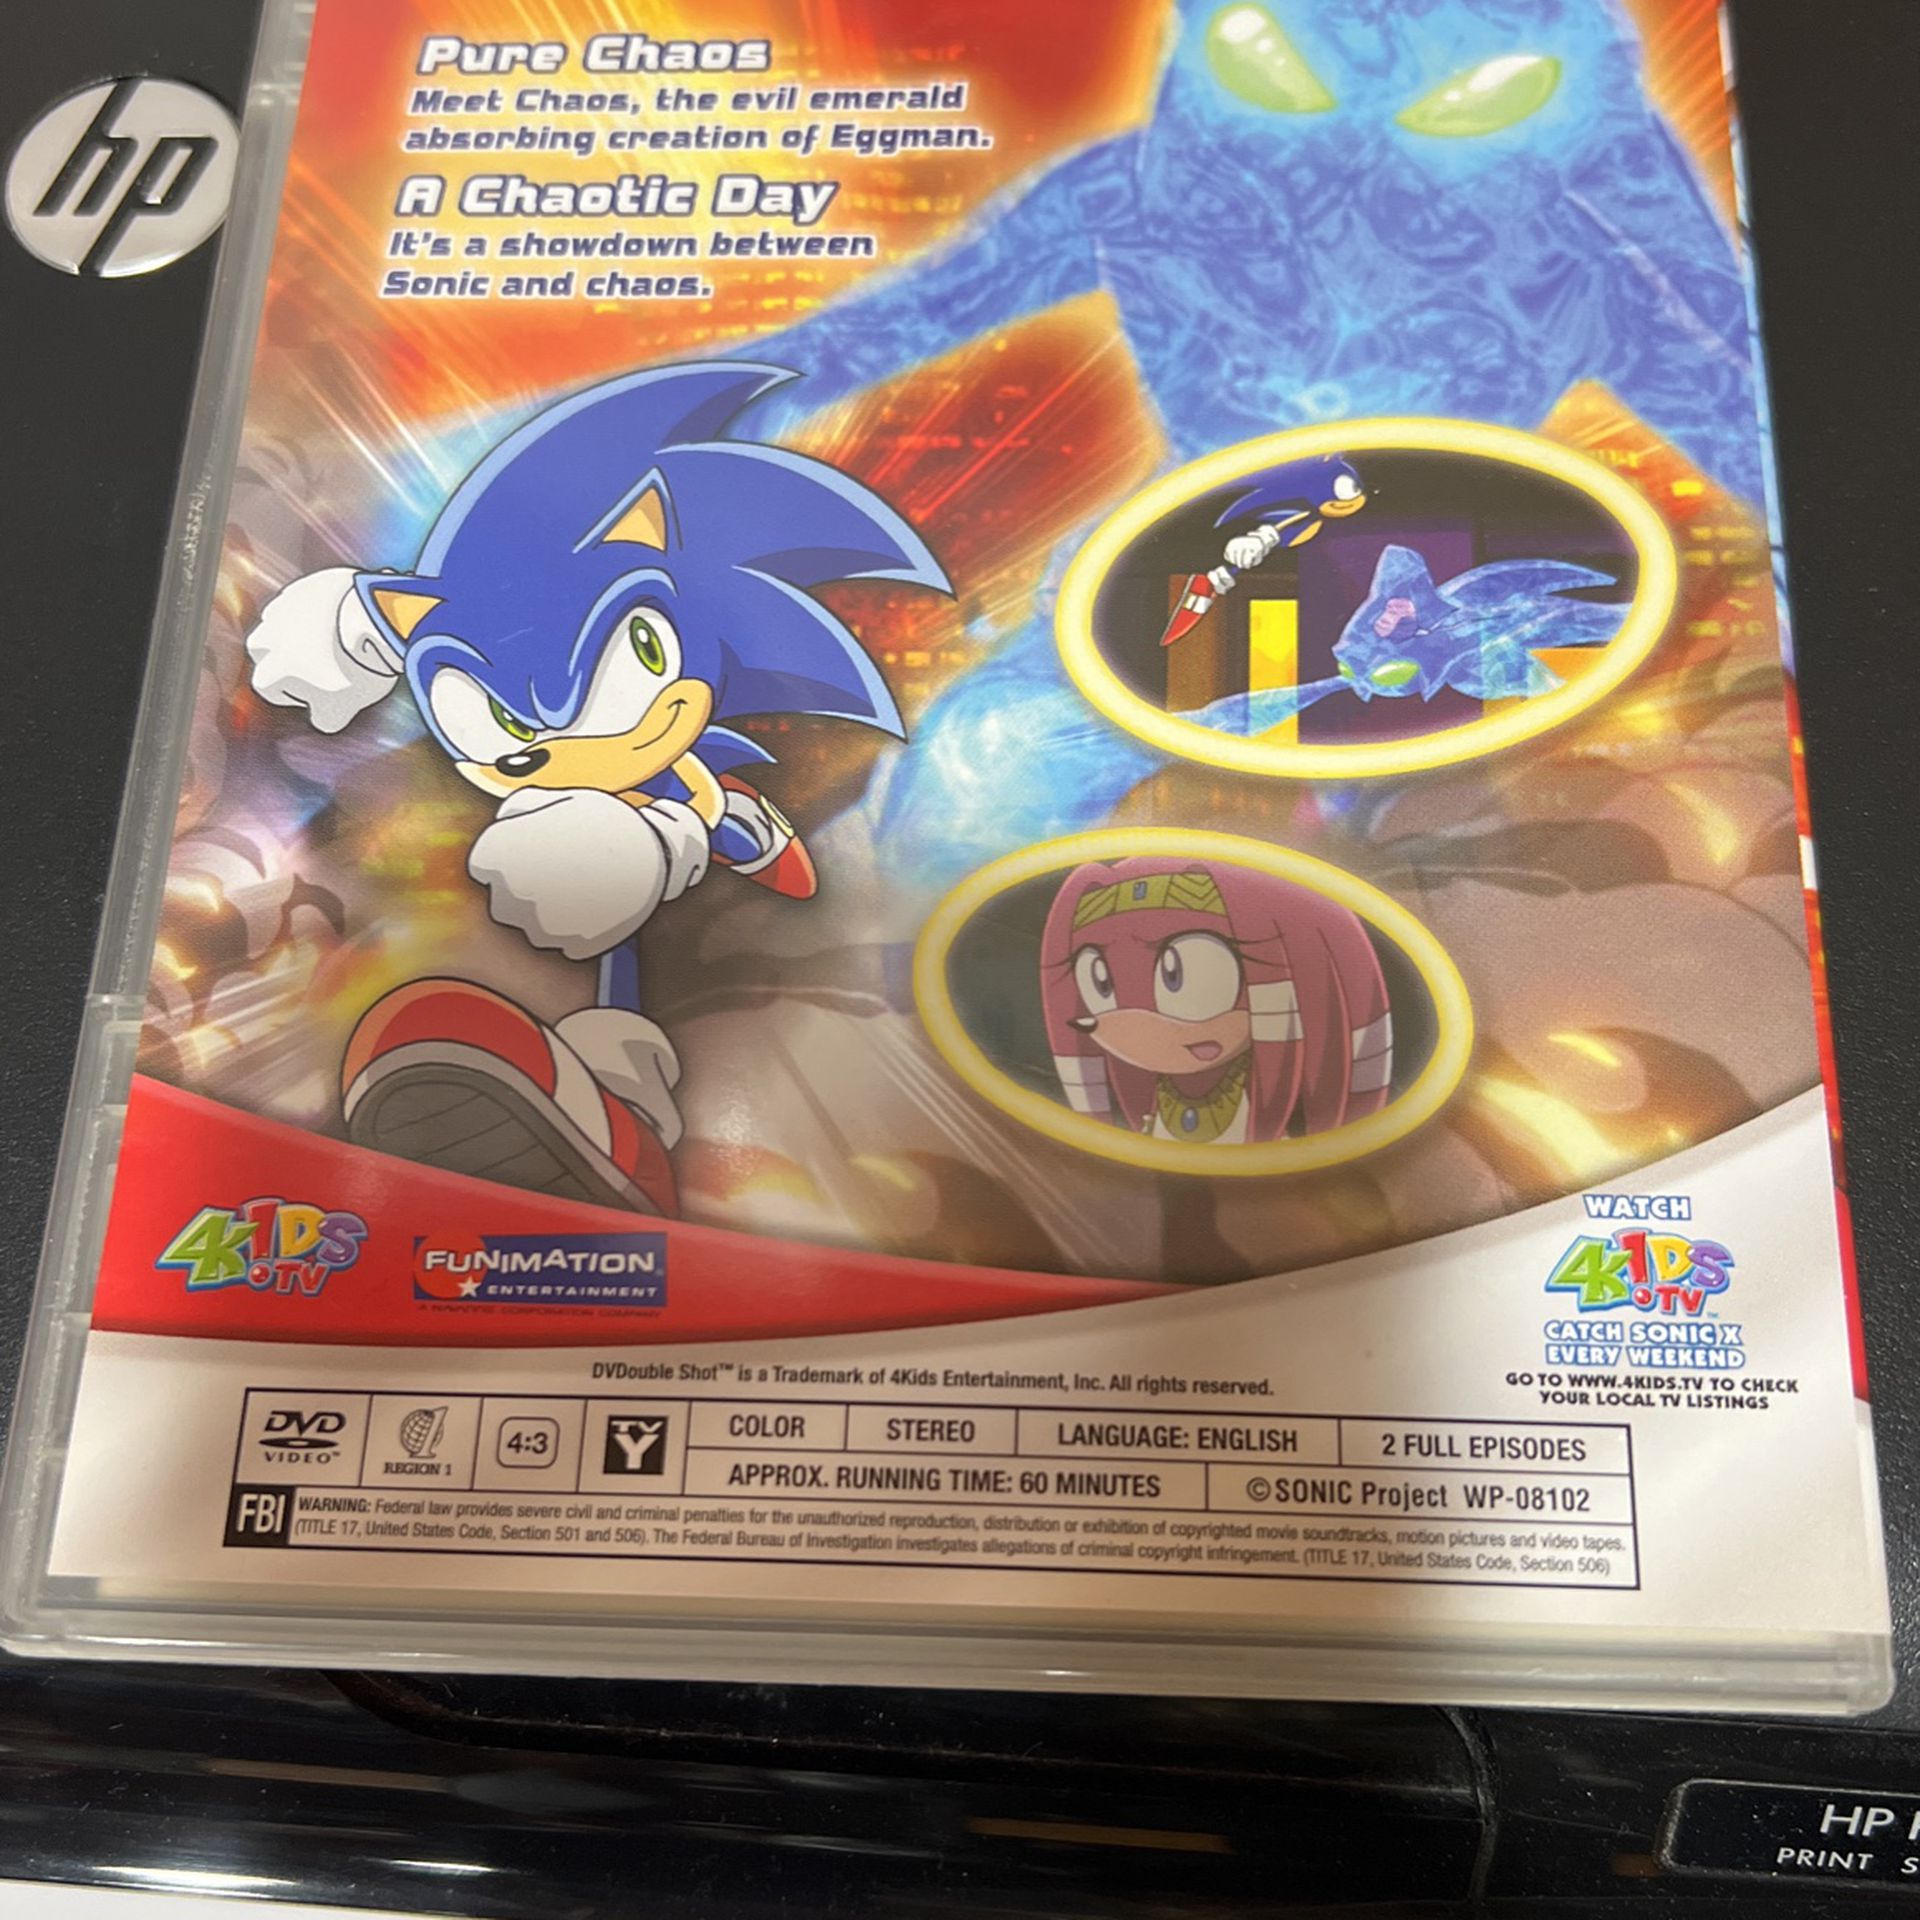 DVD: Used: Sonic X: Pure Chaos